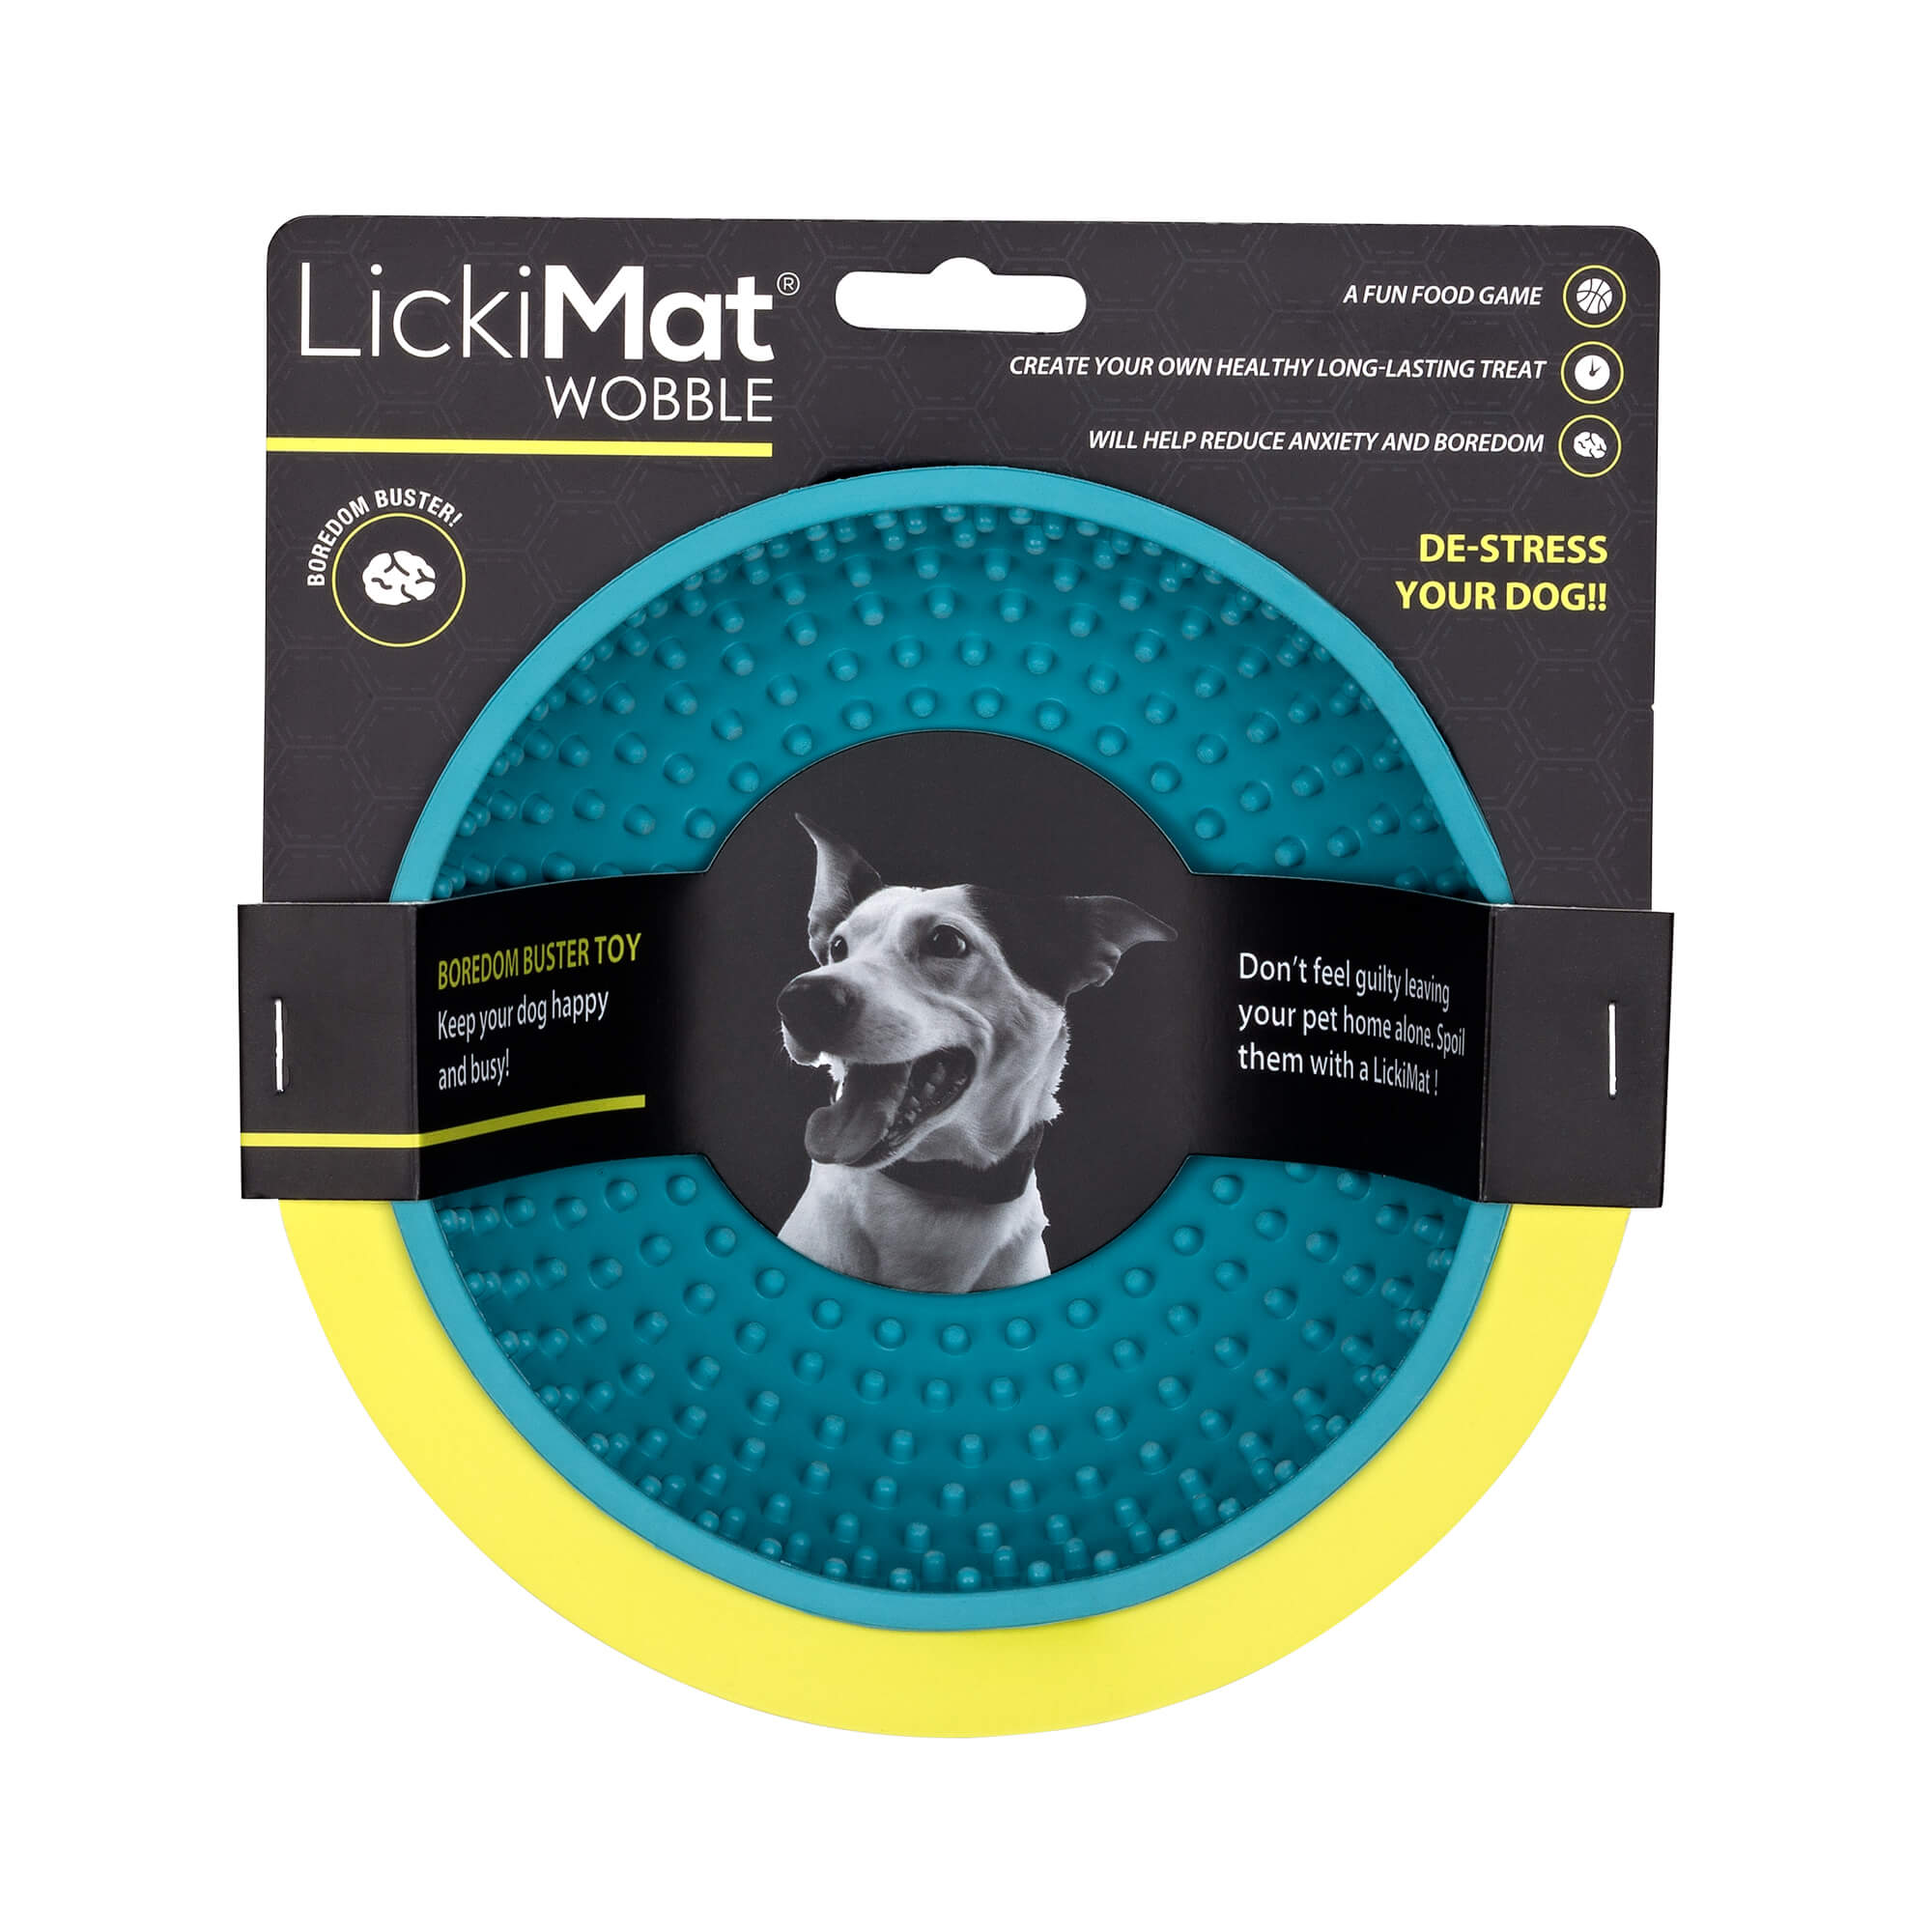 Boredom Buster & Interactive Dog Products, Shop Online